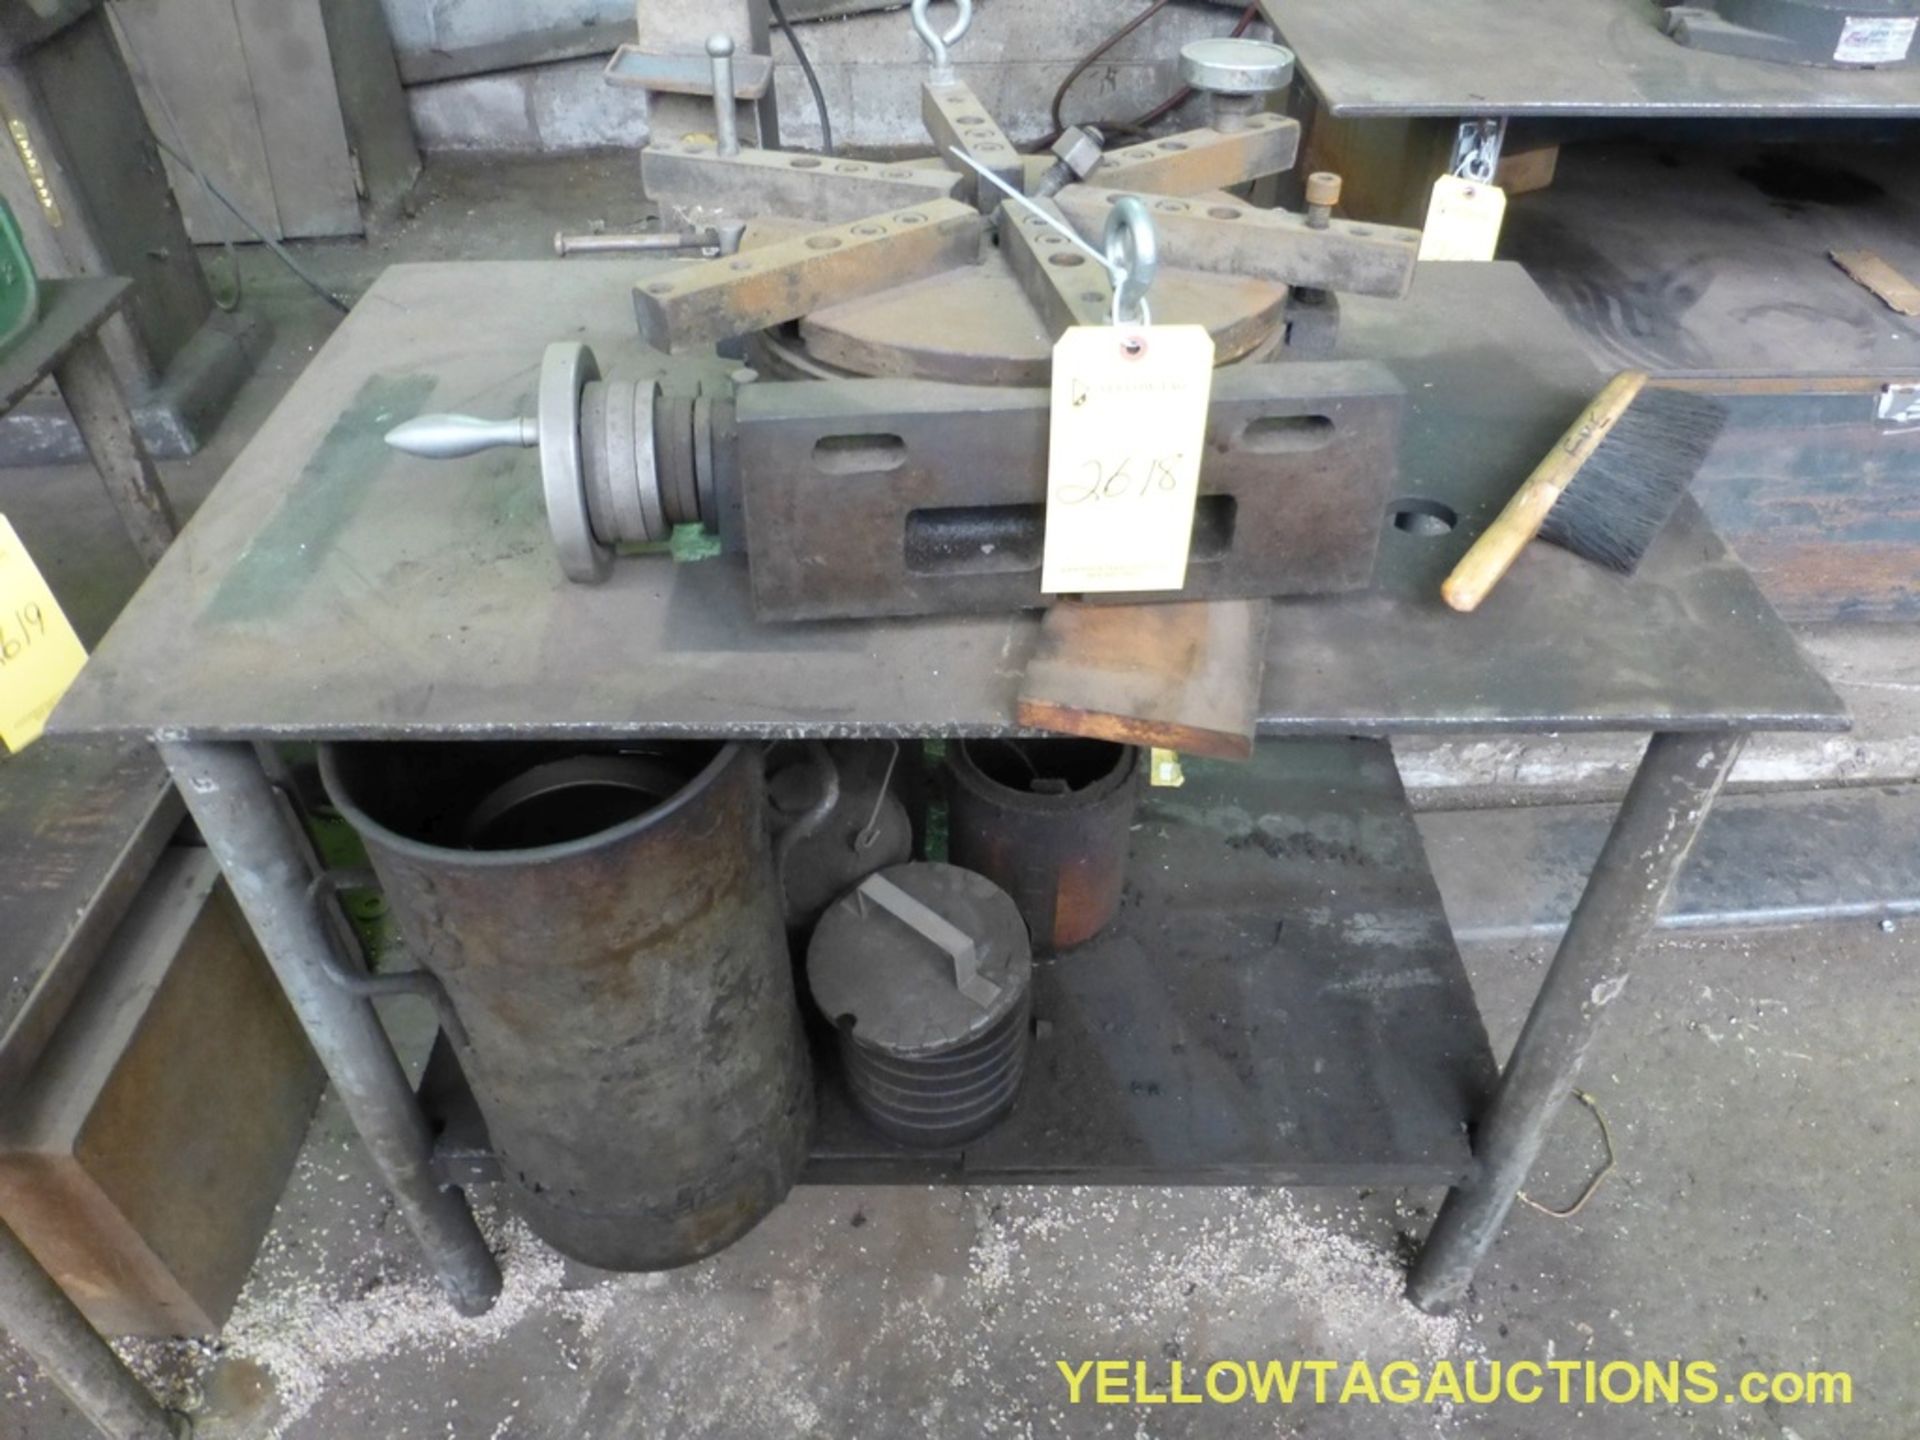 Rotary Table and Metal Table